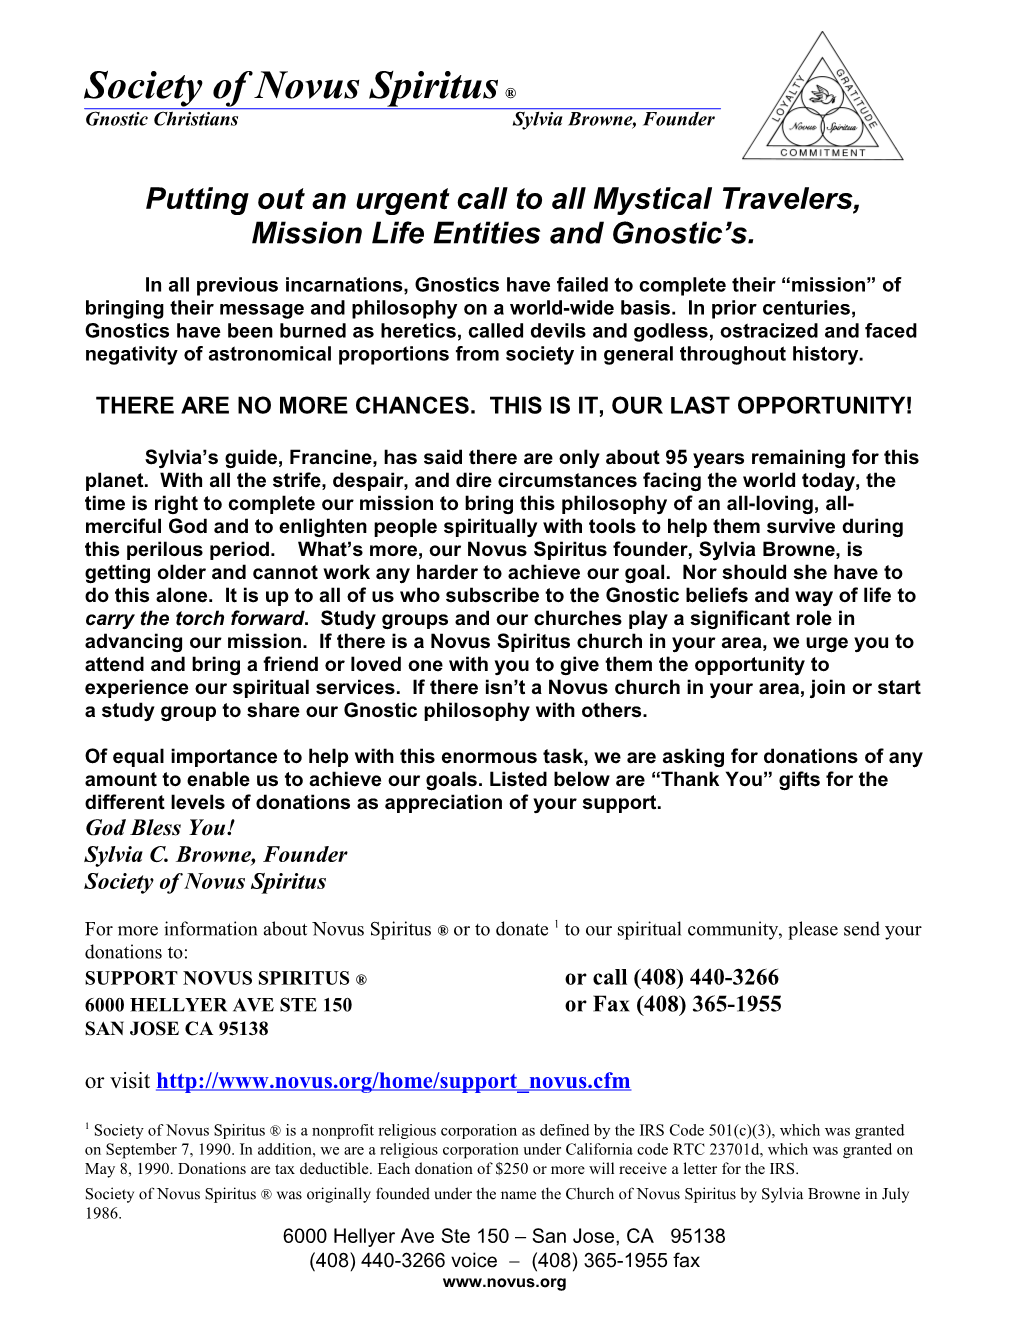 Putting out an Urgent Call to All Mystical Travelers